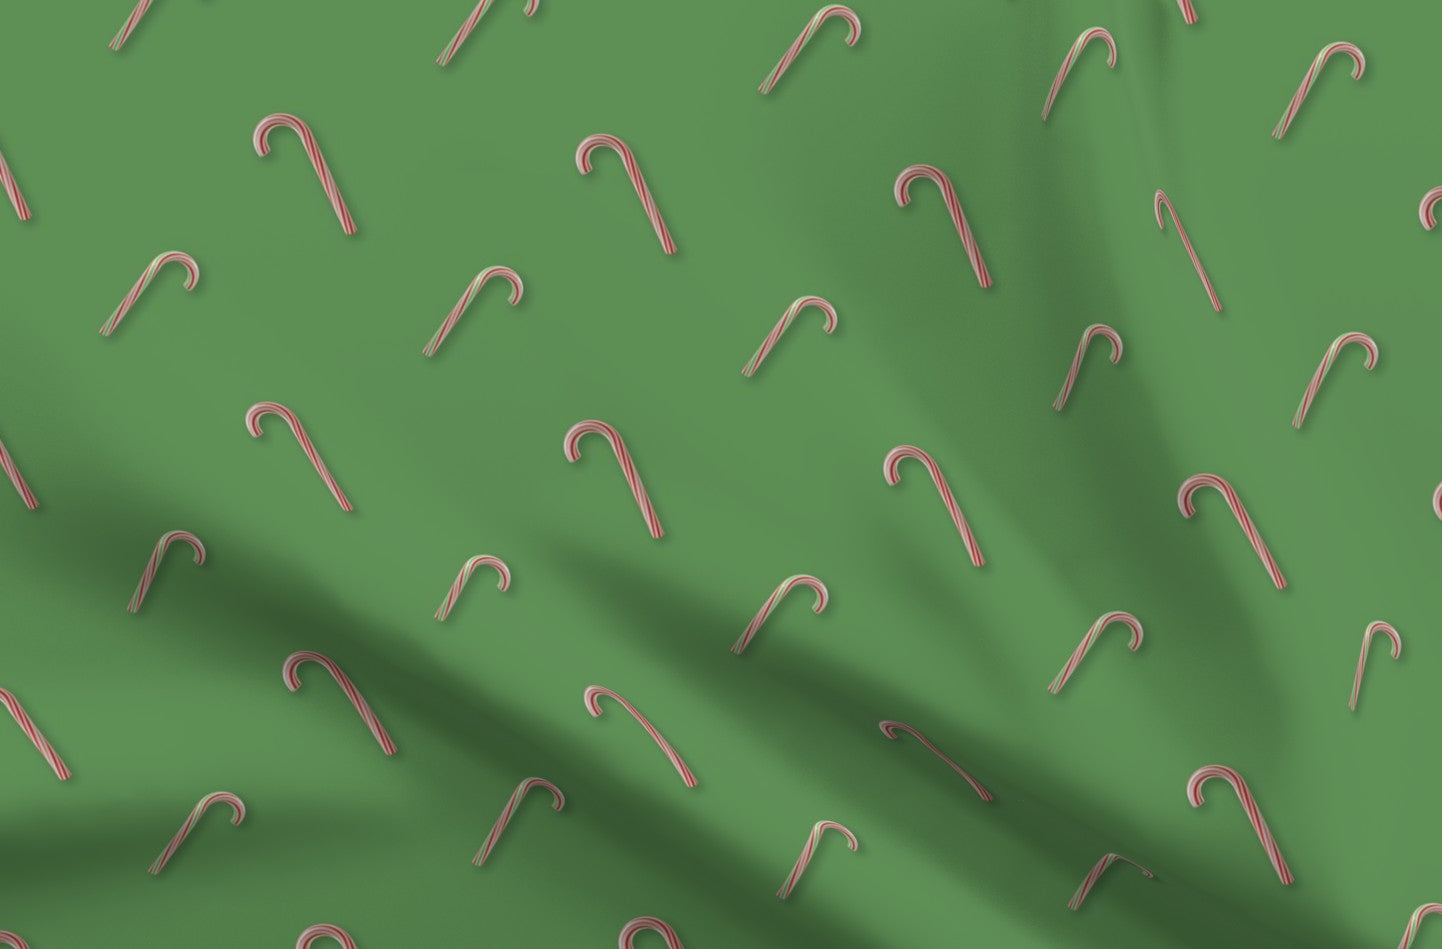 Candy Canes on Solid Green Printed Fabric by Studio Ten Design